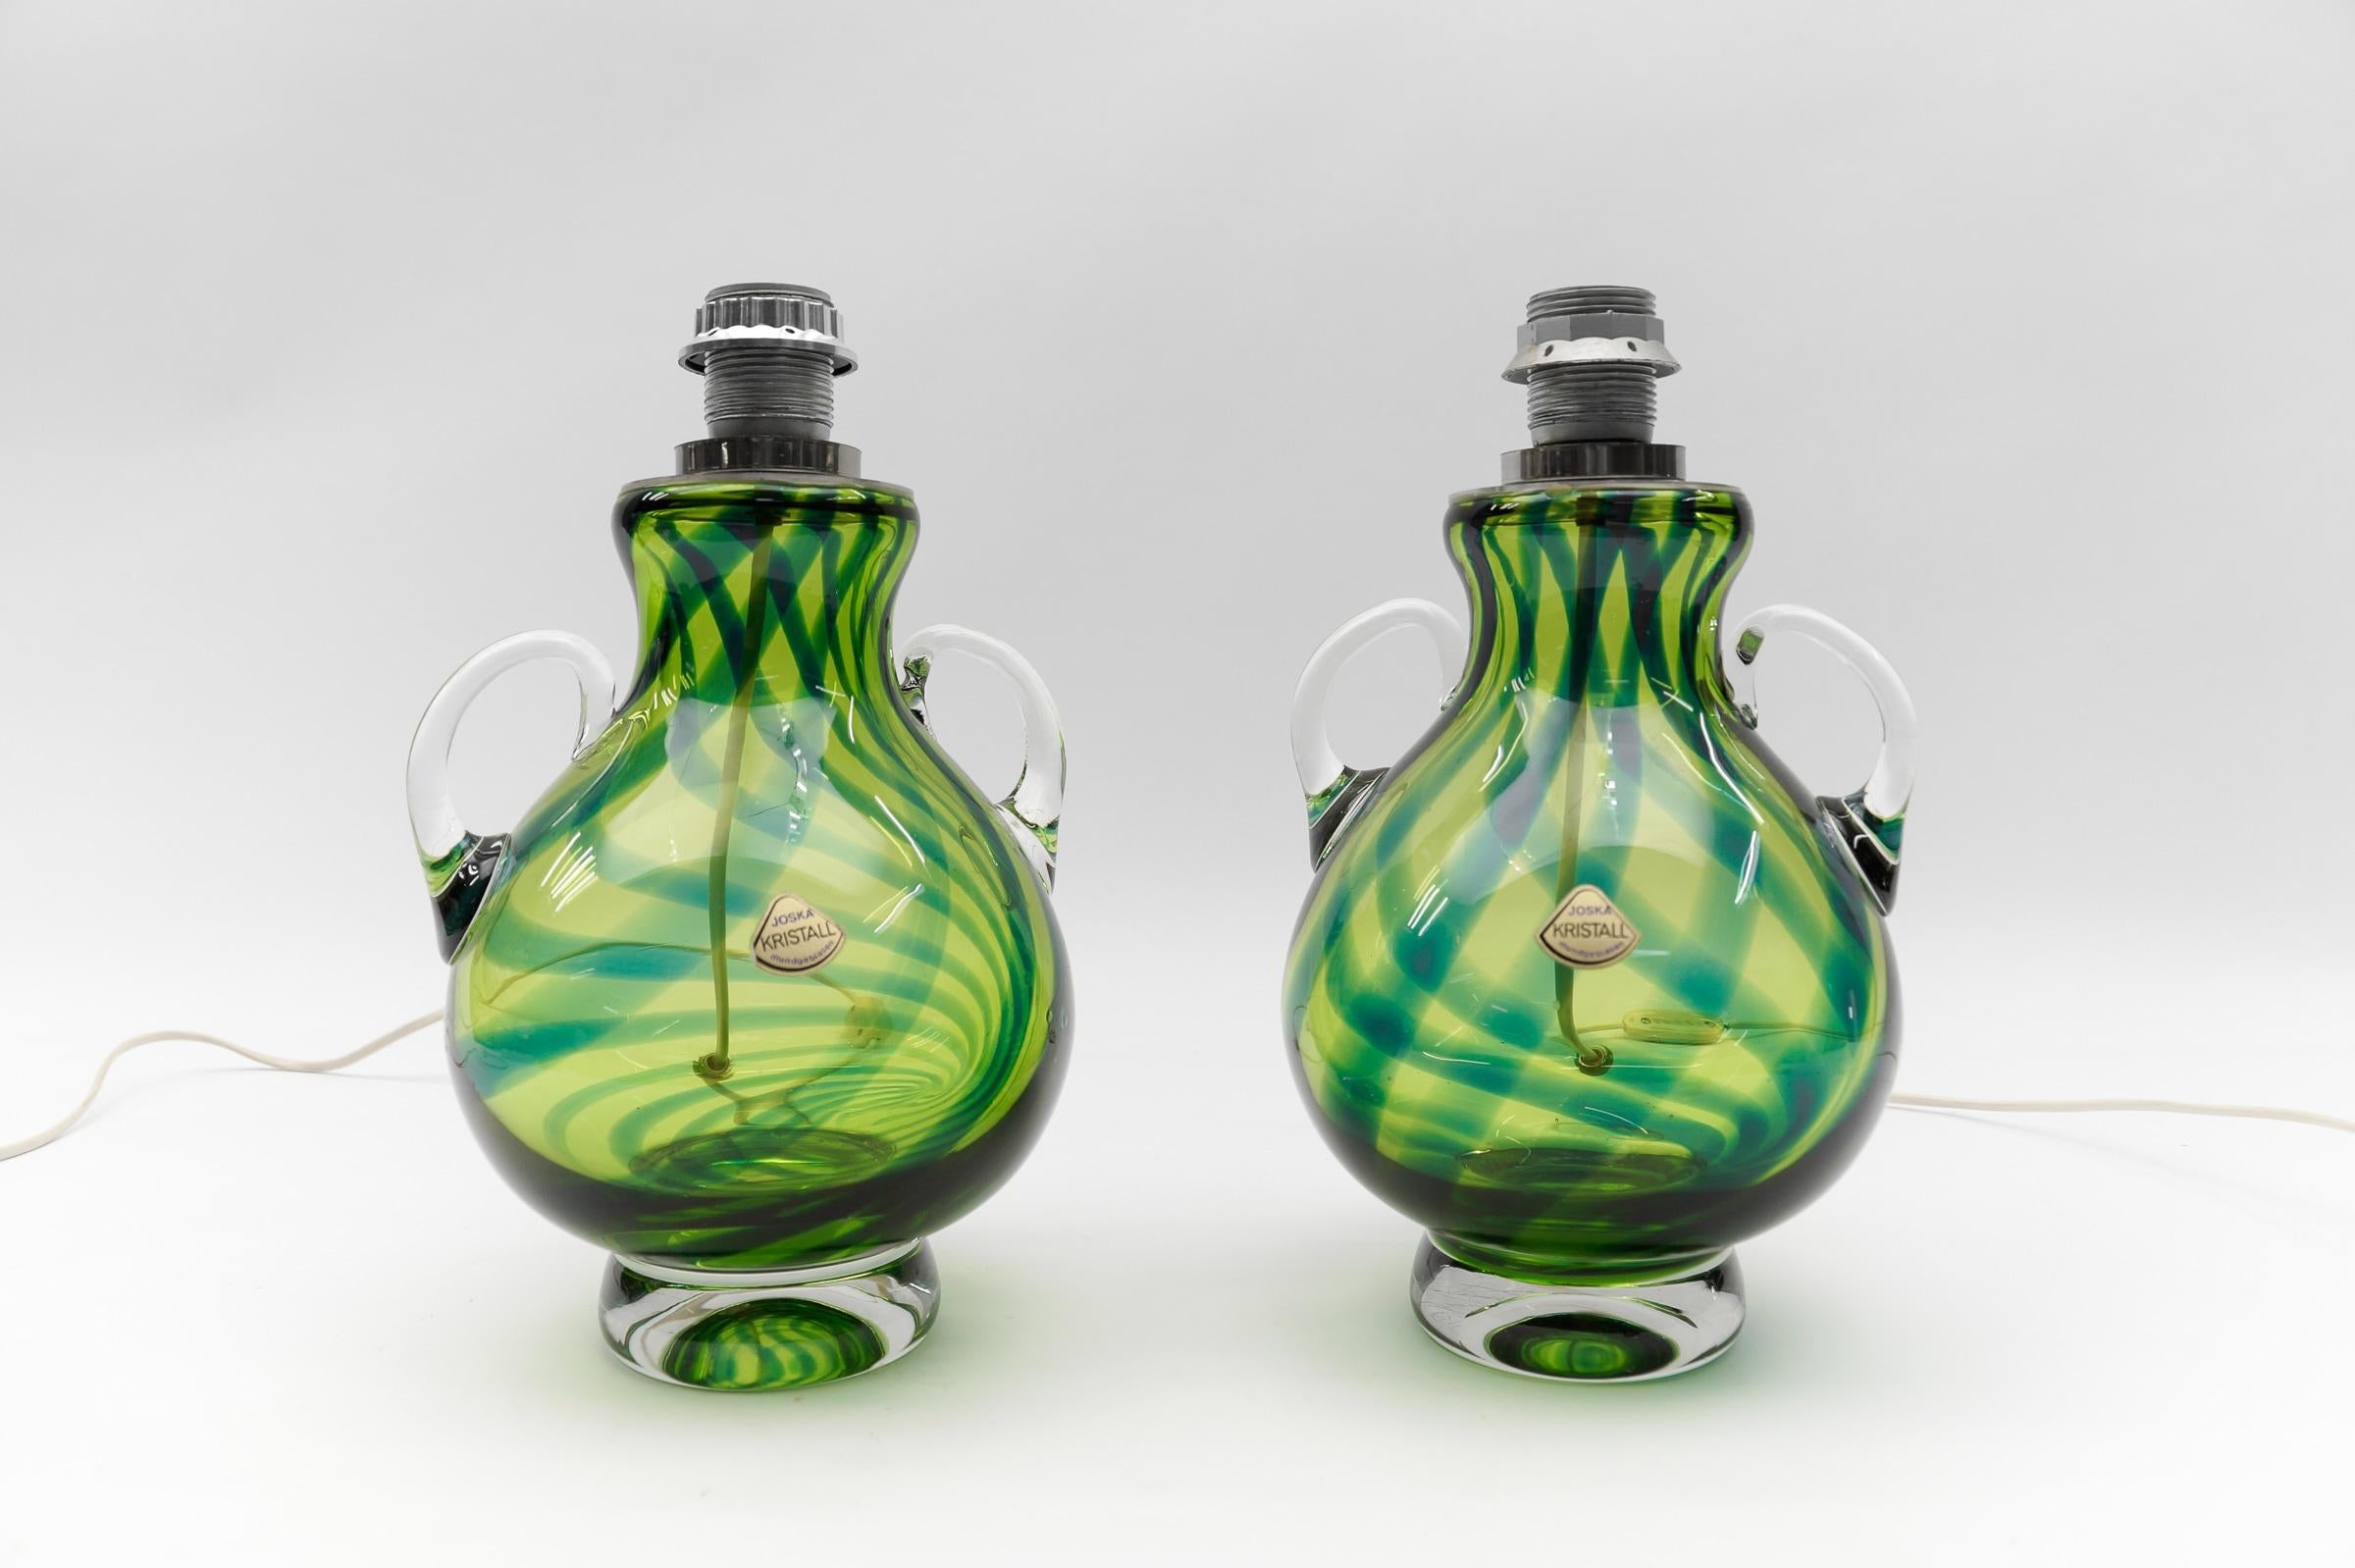 Pair Heavy Mid-Century Modern Handblown Glass Table Lamp by Joska, 1970s Germany

Dimensions
Diameter: 7.48 in. (19 cm)
Height: 13.38 in. (34 cm)

The lamps need 1 x E27 / E26 Edison screw fit bulb, is wired, in working condition and runs both on